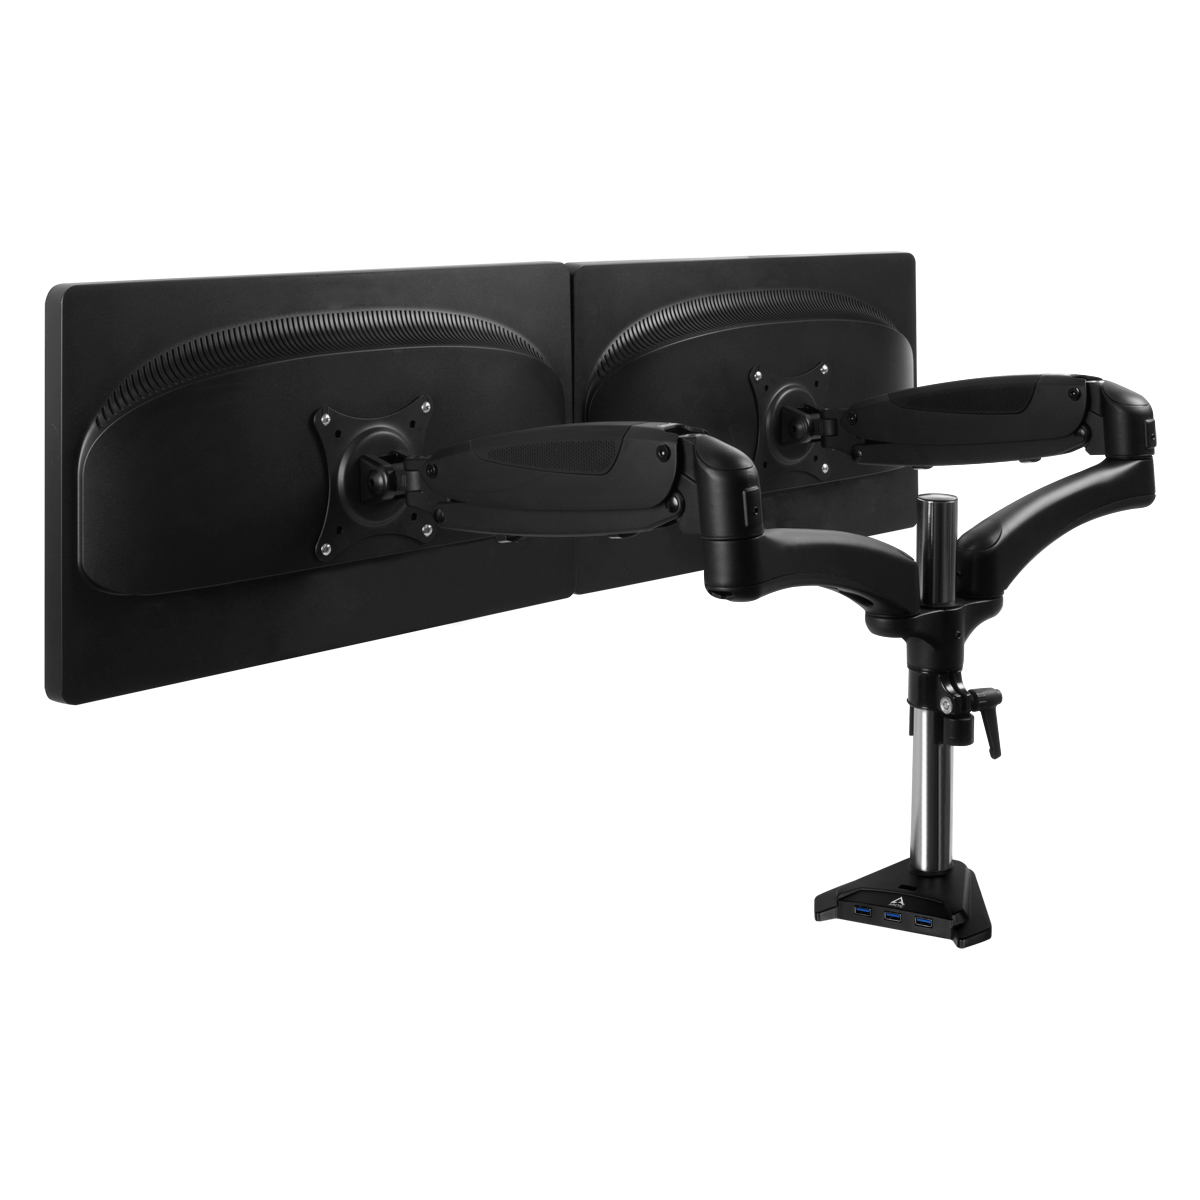 Monitor Setup with Desk Mount Gas Spring Dual Monitor Arm ARCTIC Z2-3D (Gen 3)